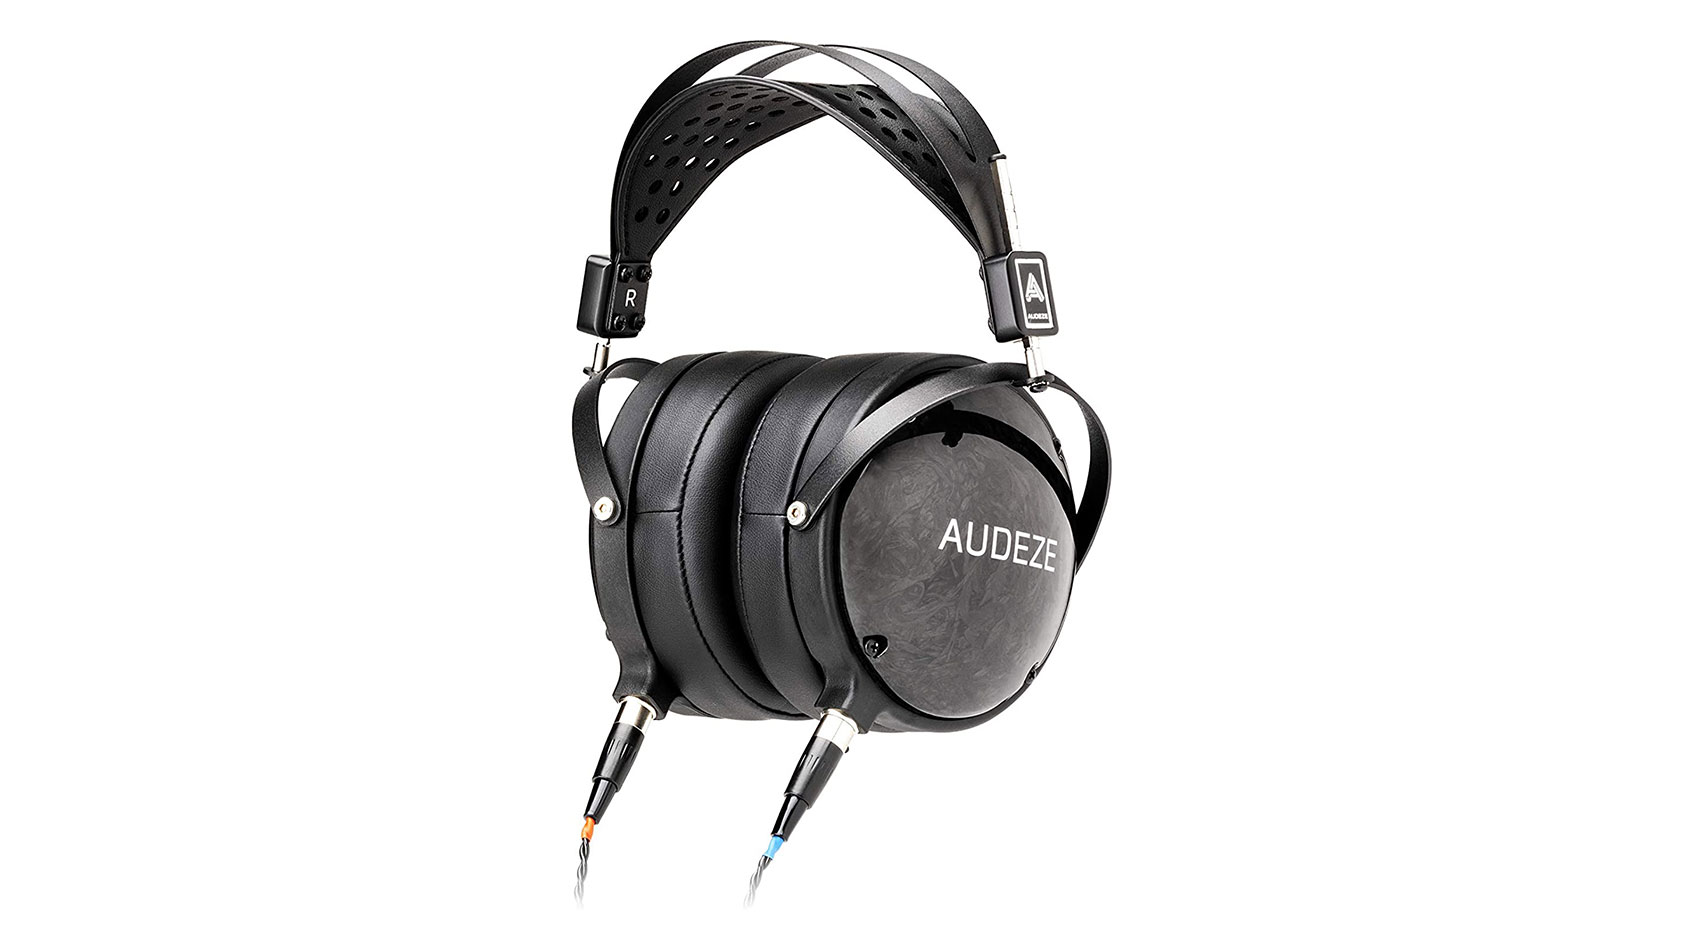 The Audeze LCD-2 Closed-back planar magnetic headphones in black against a white background.